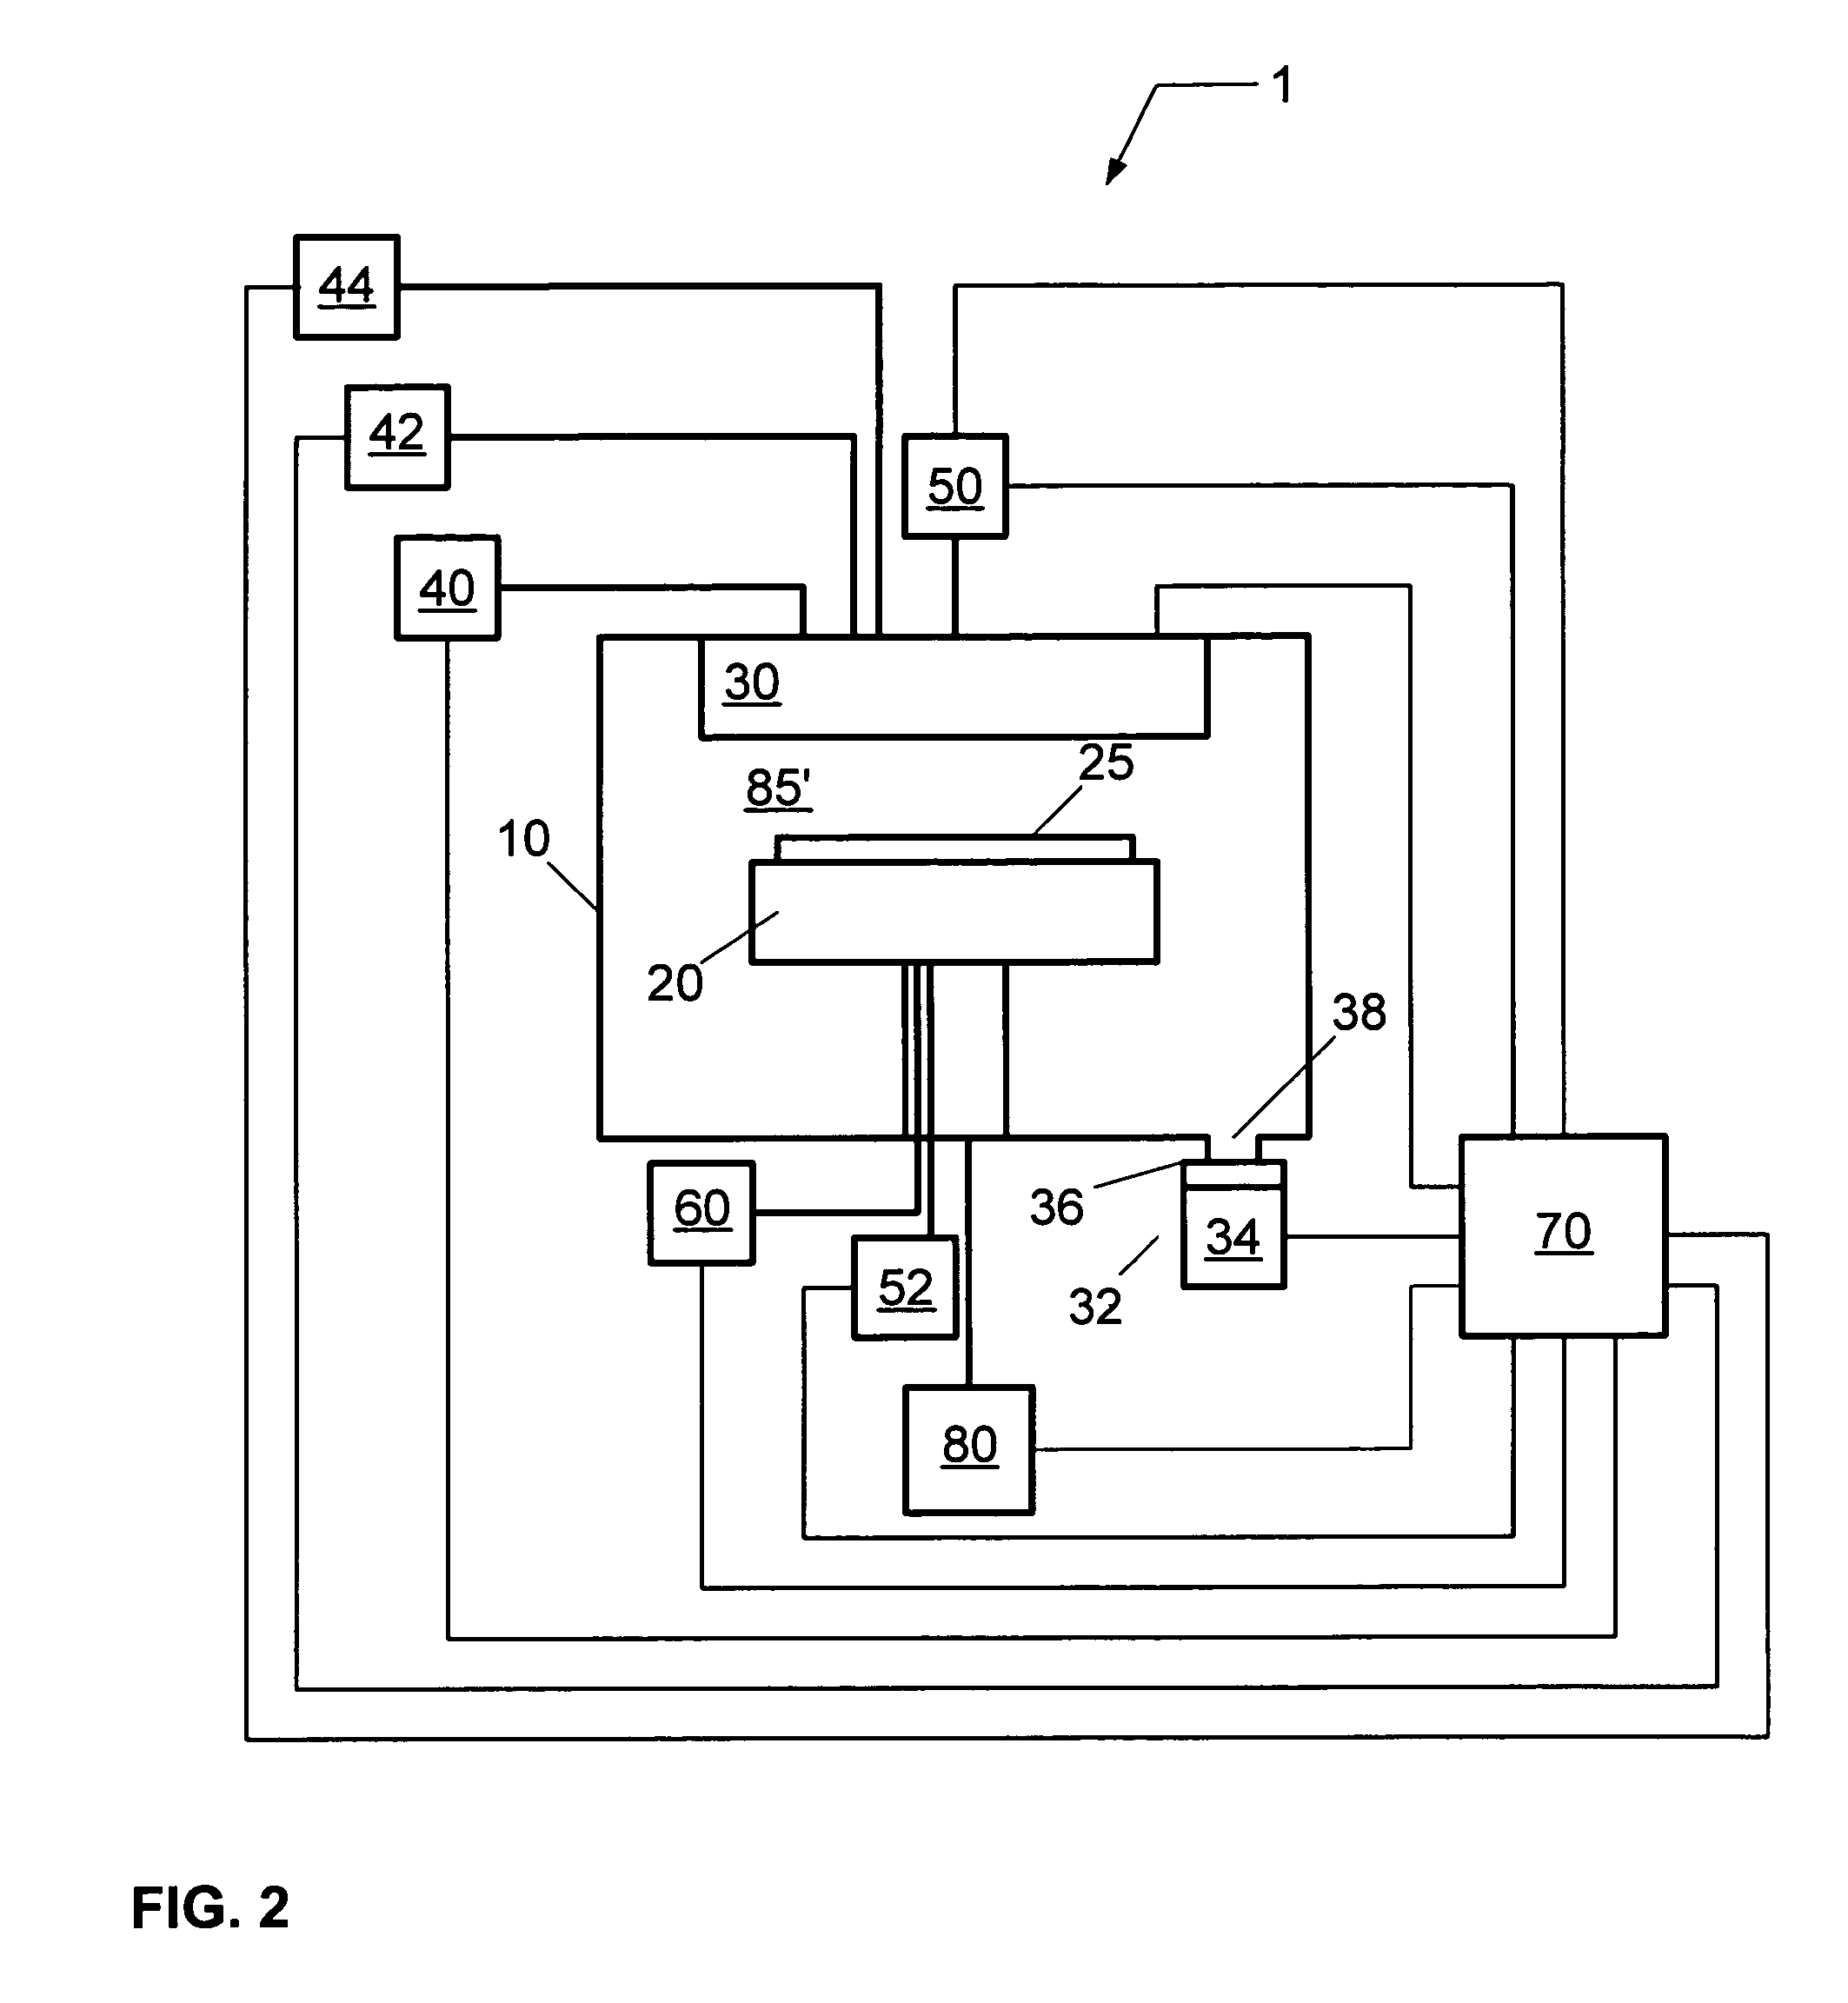 Method and system for performing plasma enhanced atomic layer deposition